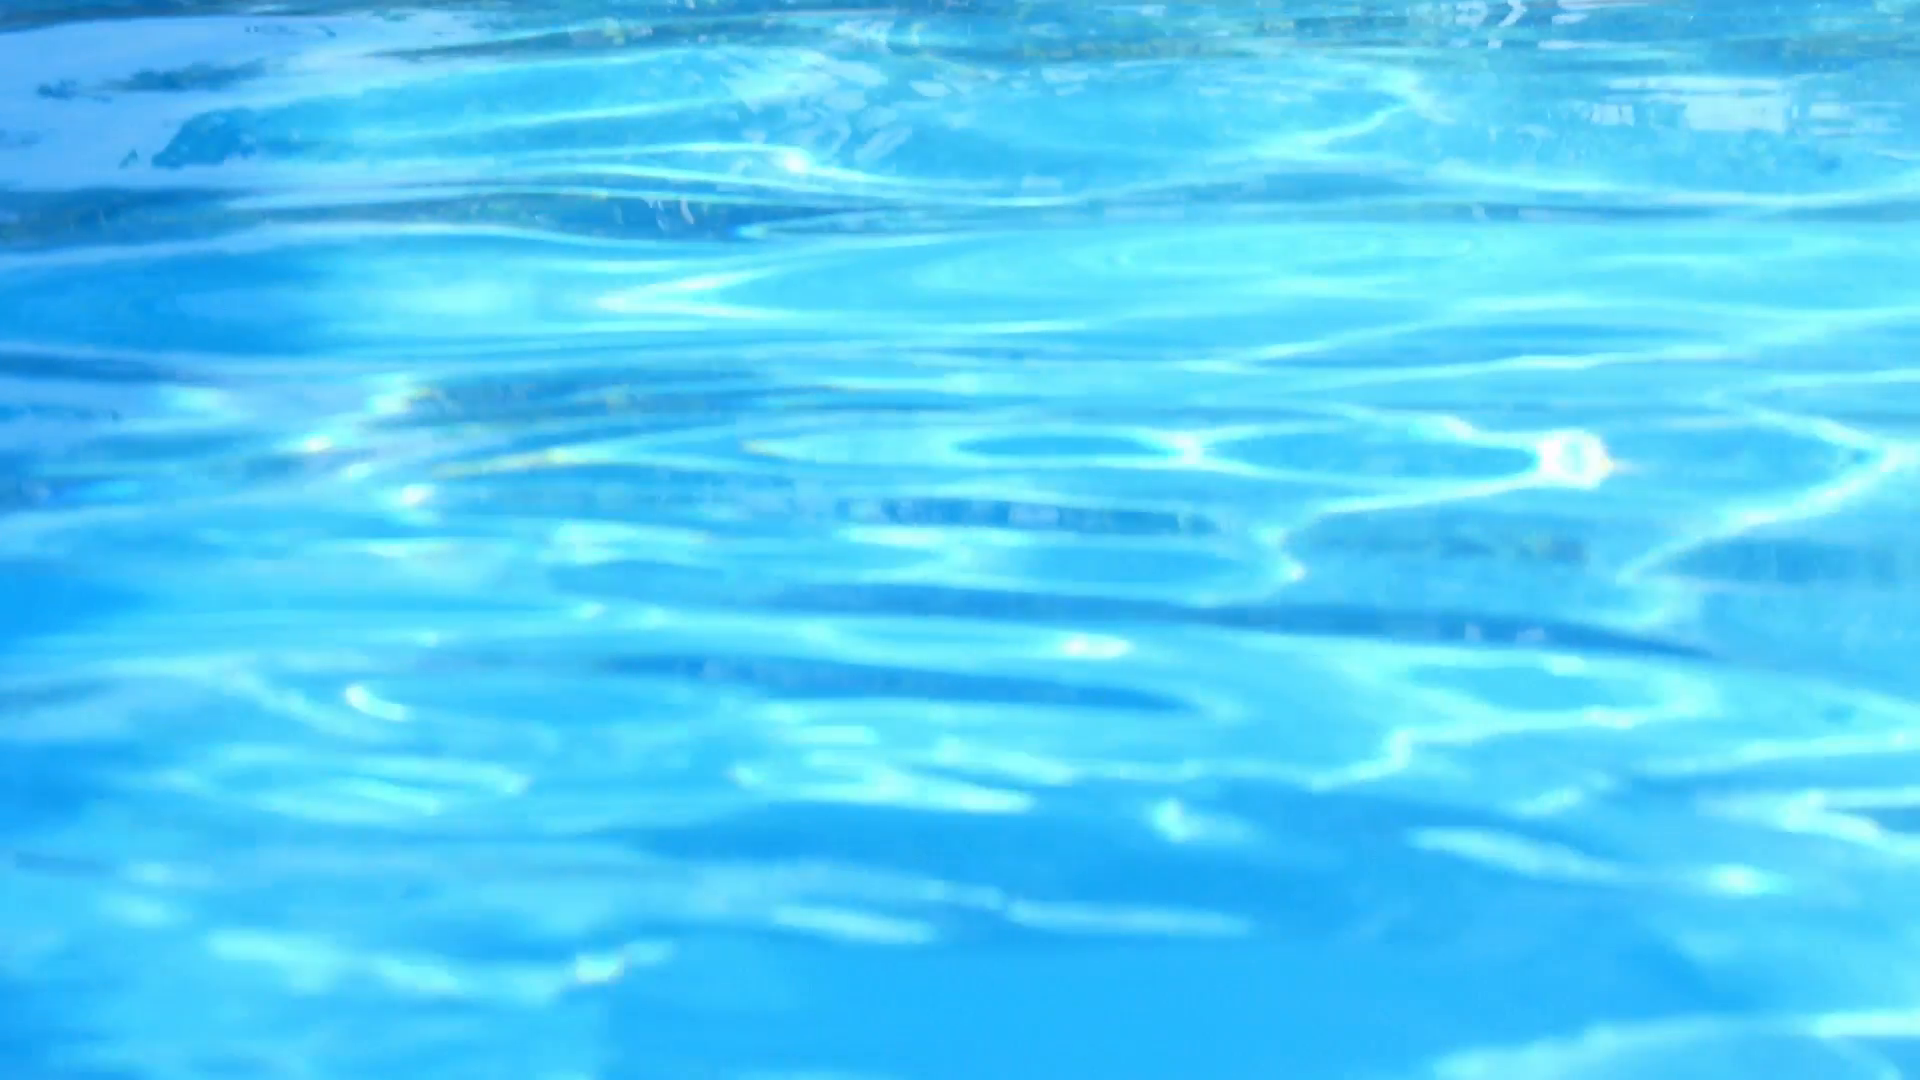 Swimming Pool Water Surface With Sparkli #638570.